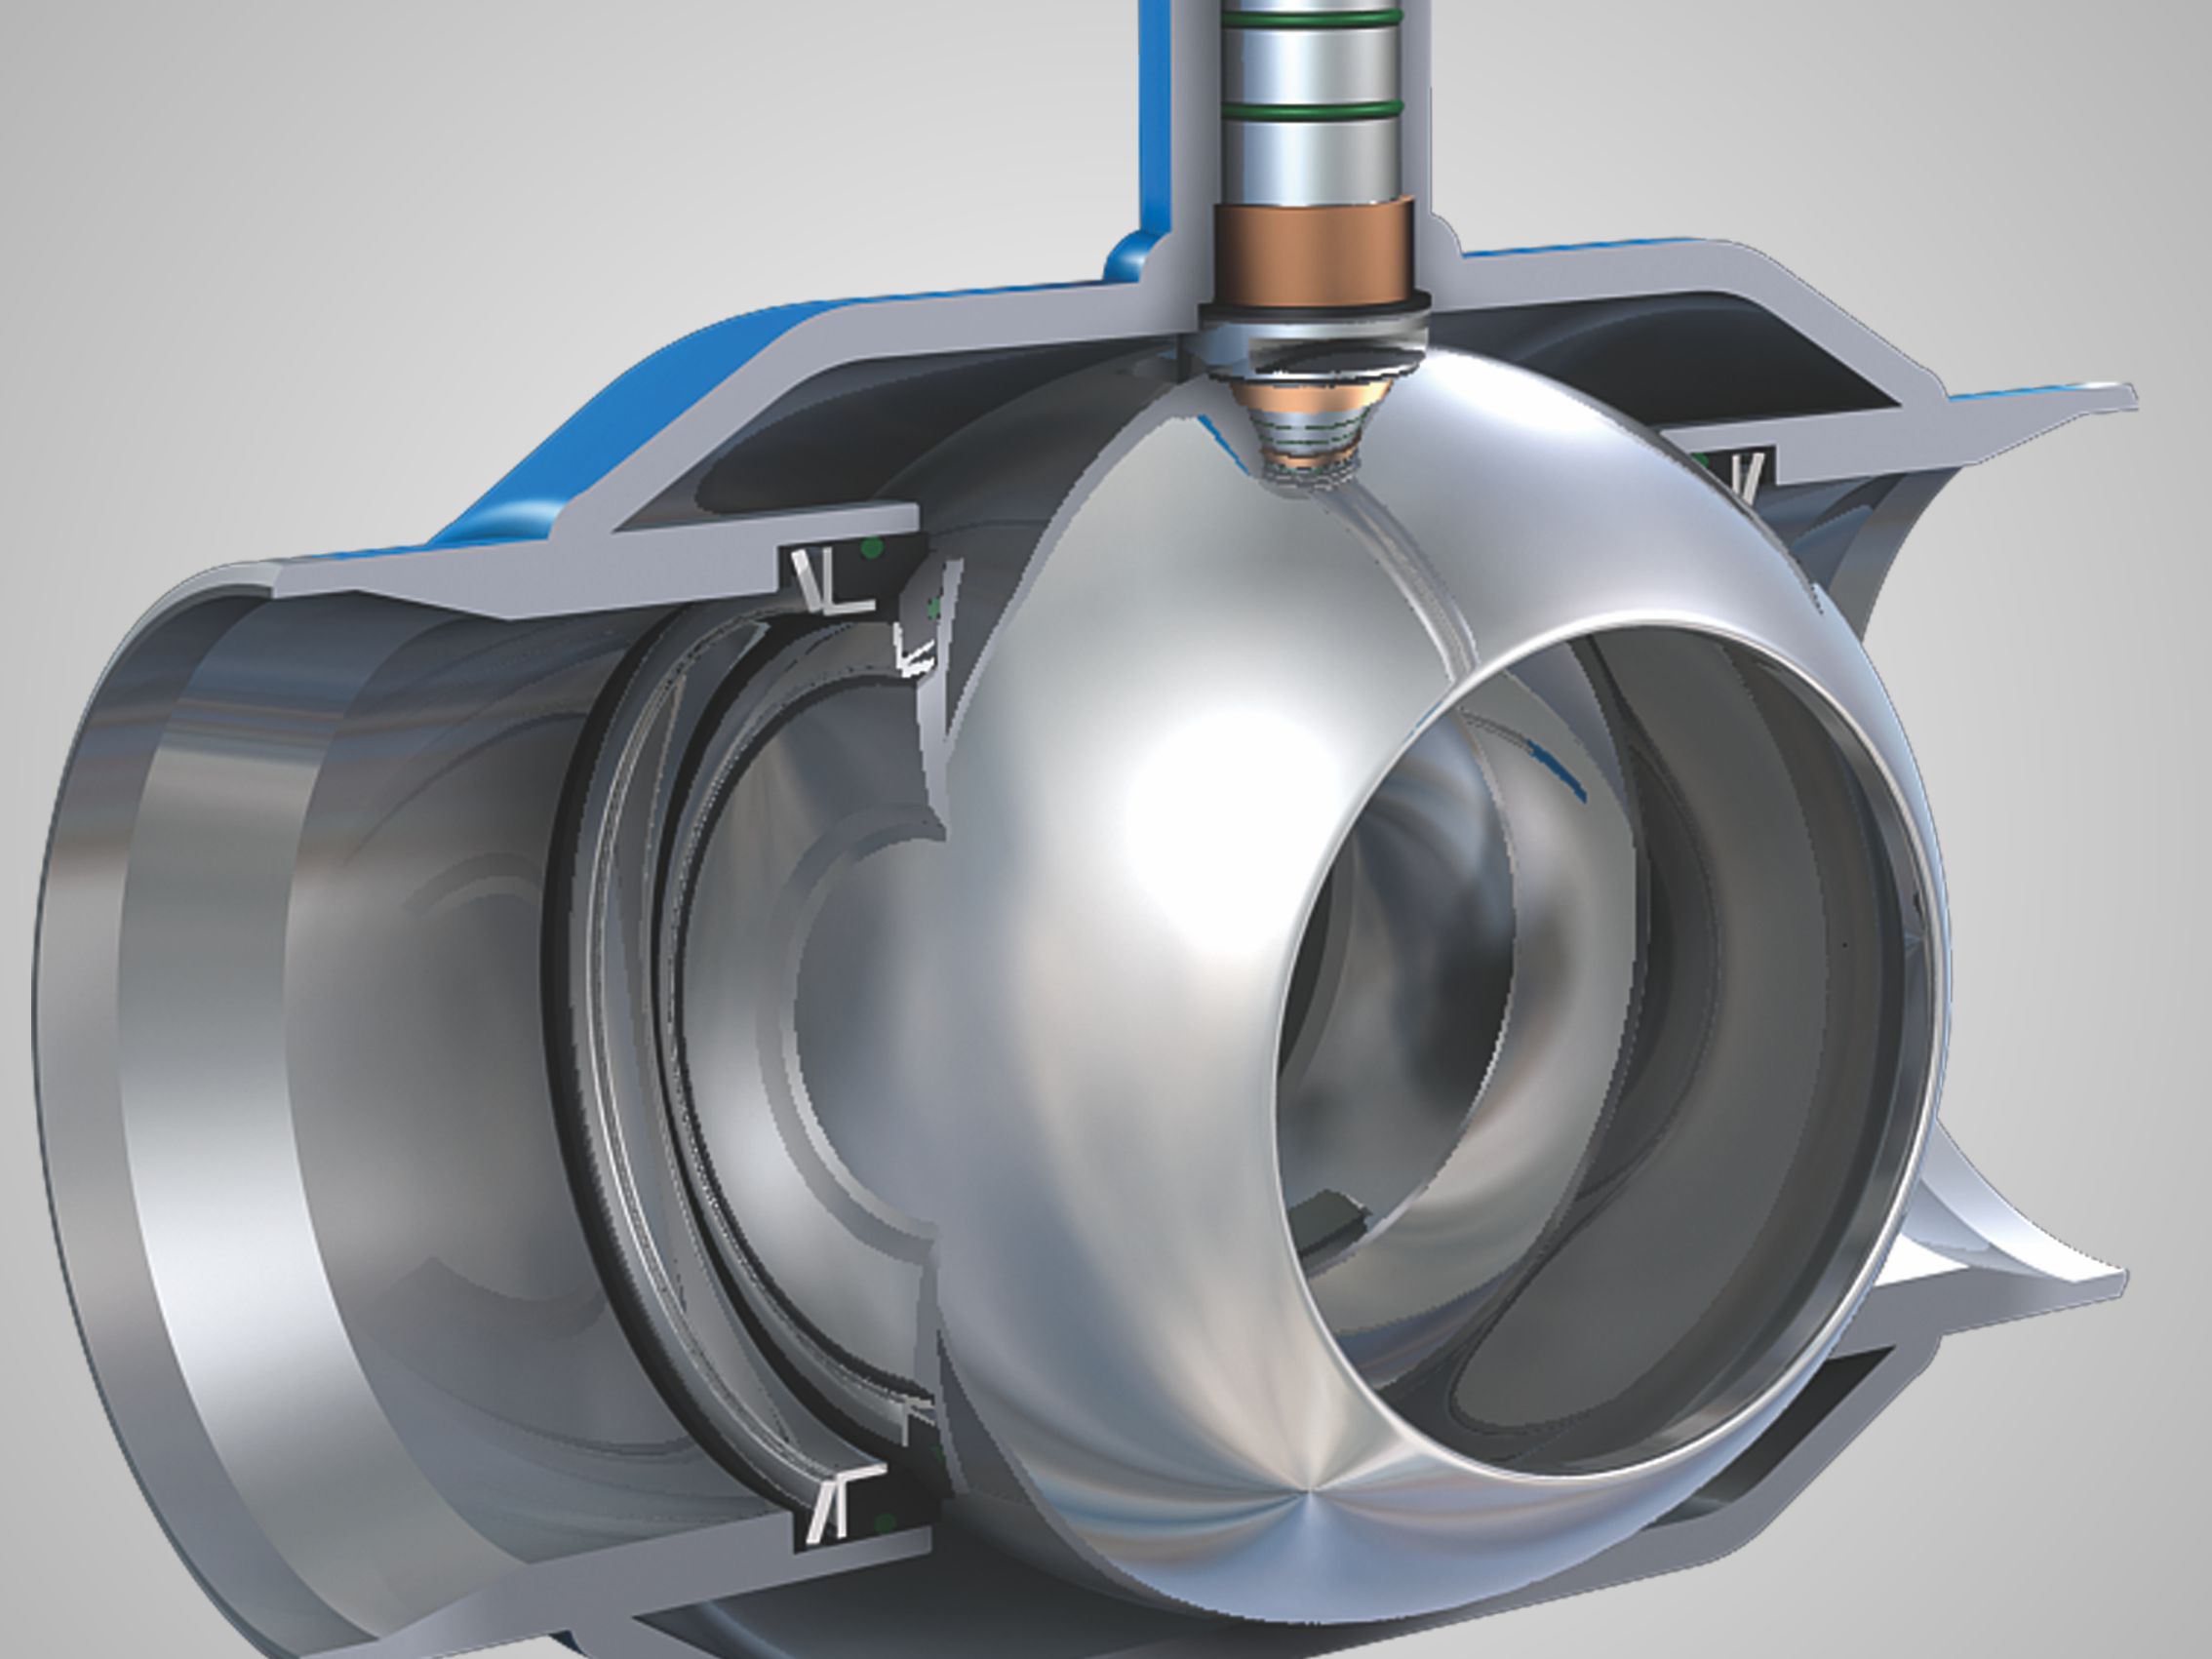 What factors affect the use of all welded ball valve?